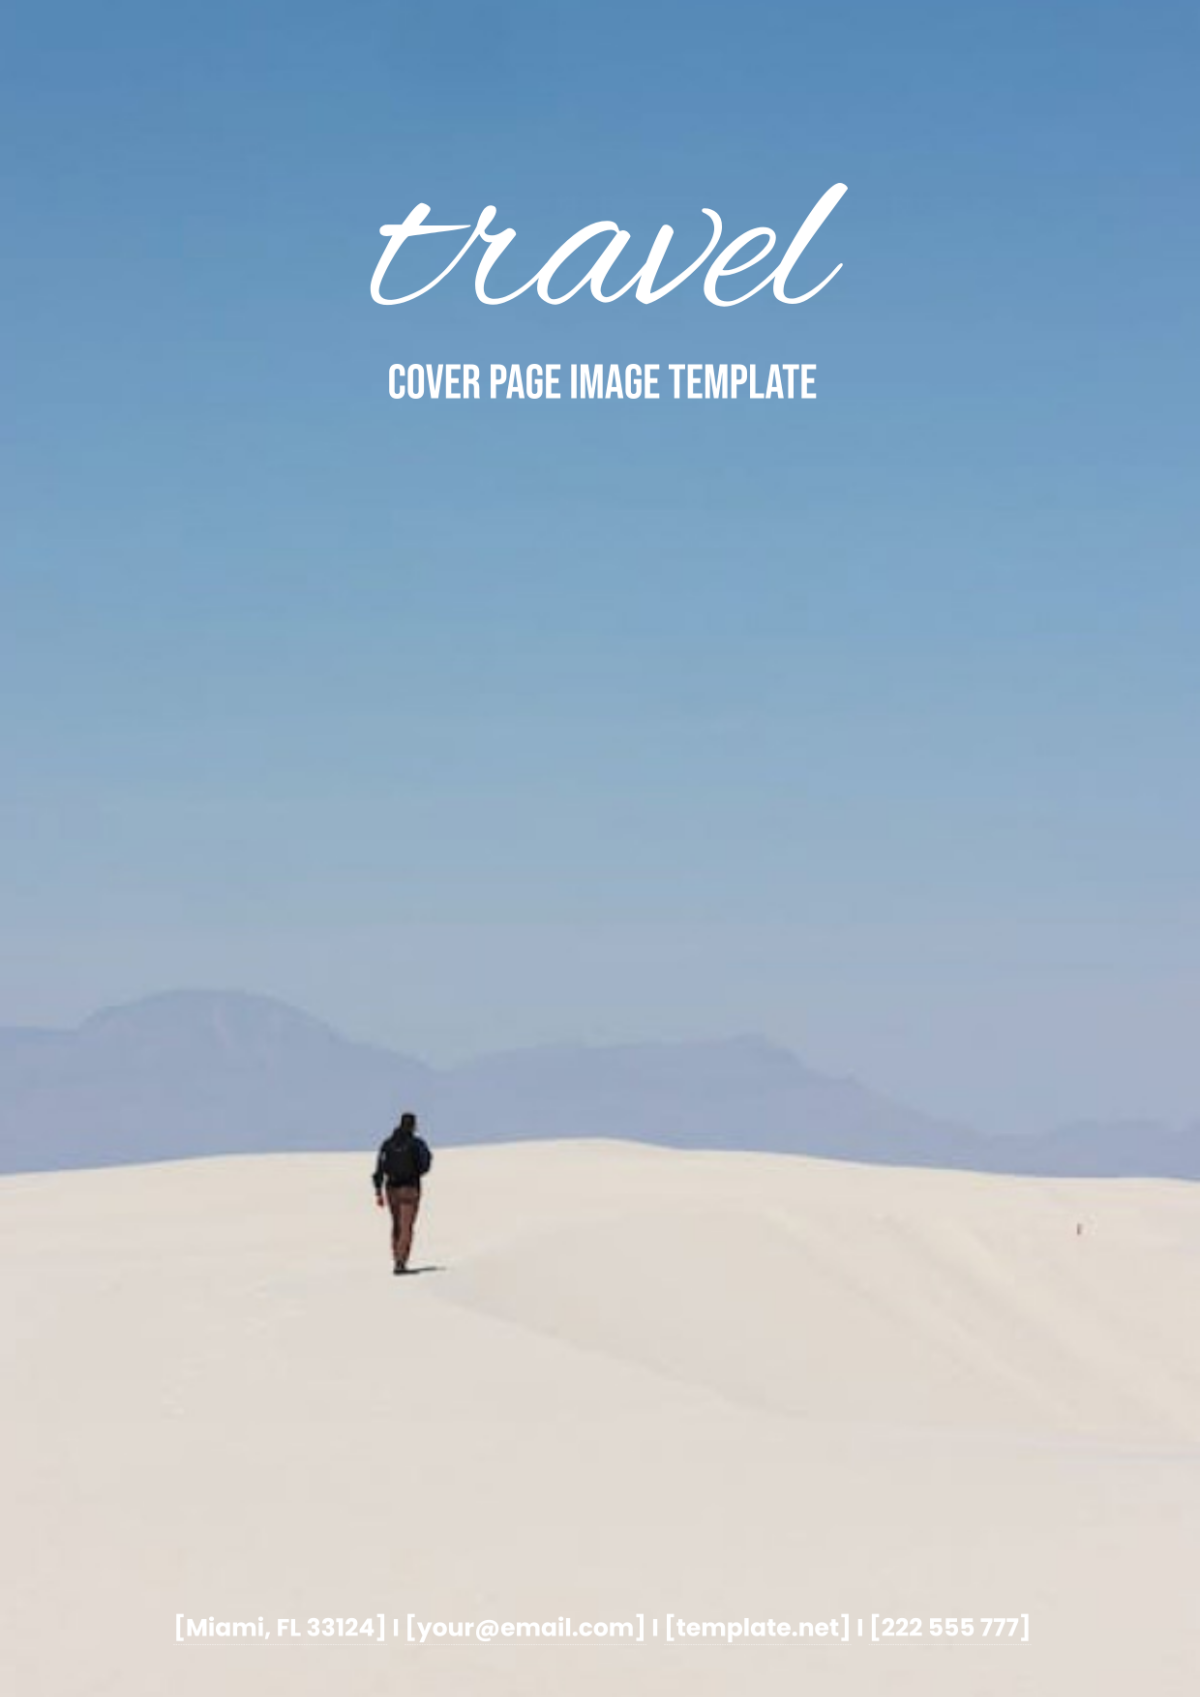 Travel Cover Page Image  Template